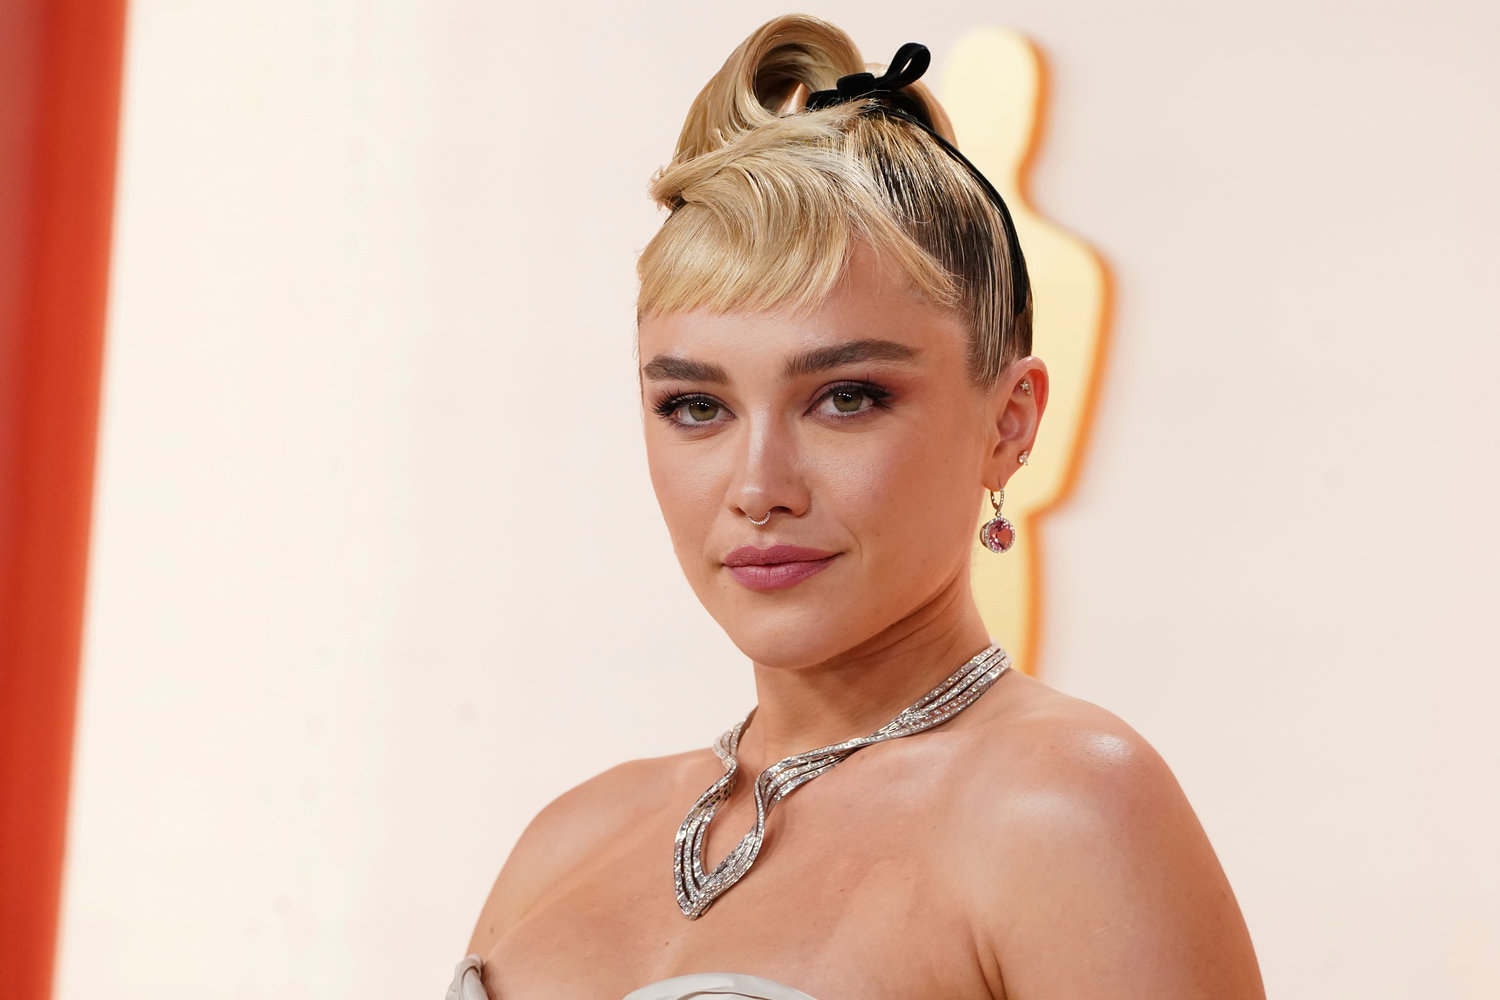 Florence Pugh arrives at the Oscars on Sunday, March 12, 2023, at the Dolby Theatre in Los Angeles. (Photo by Jordan Strauss/Invision/AP)